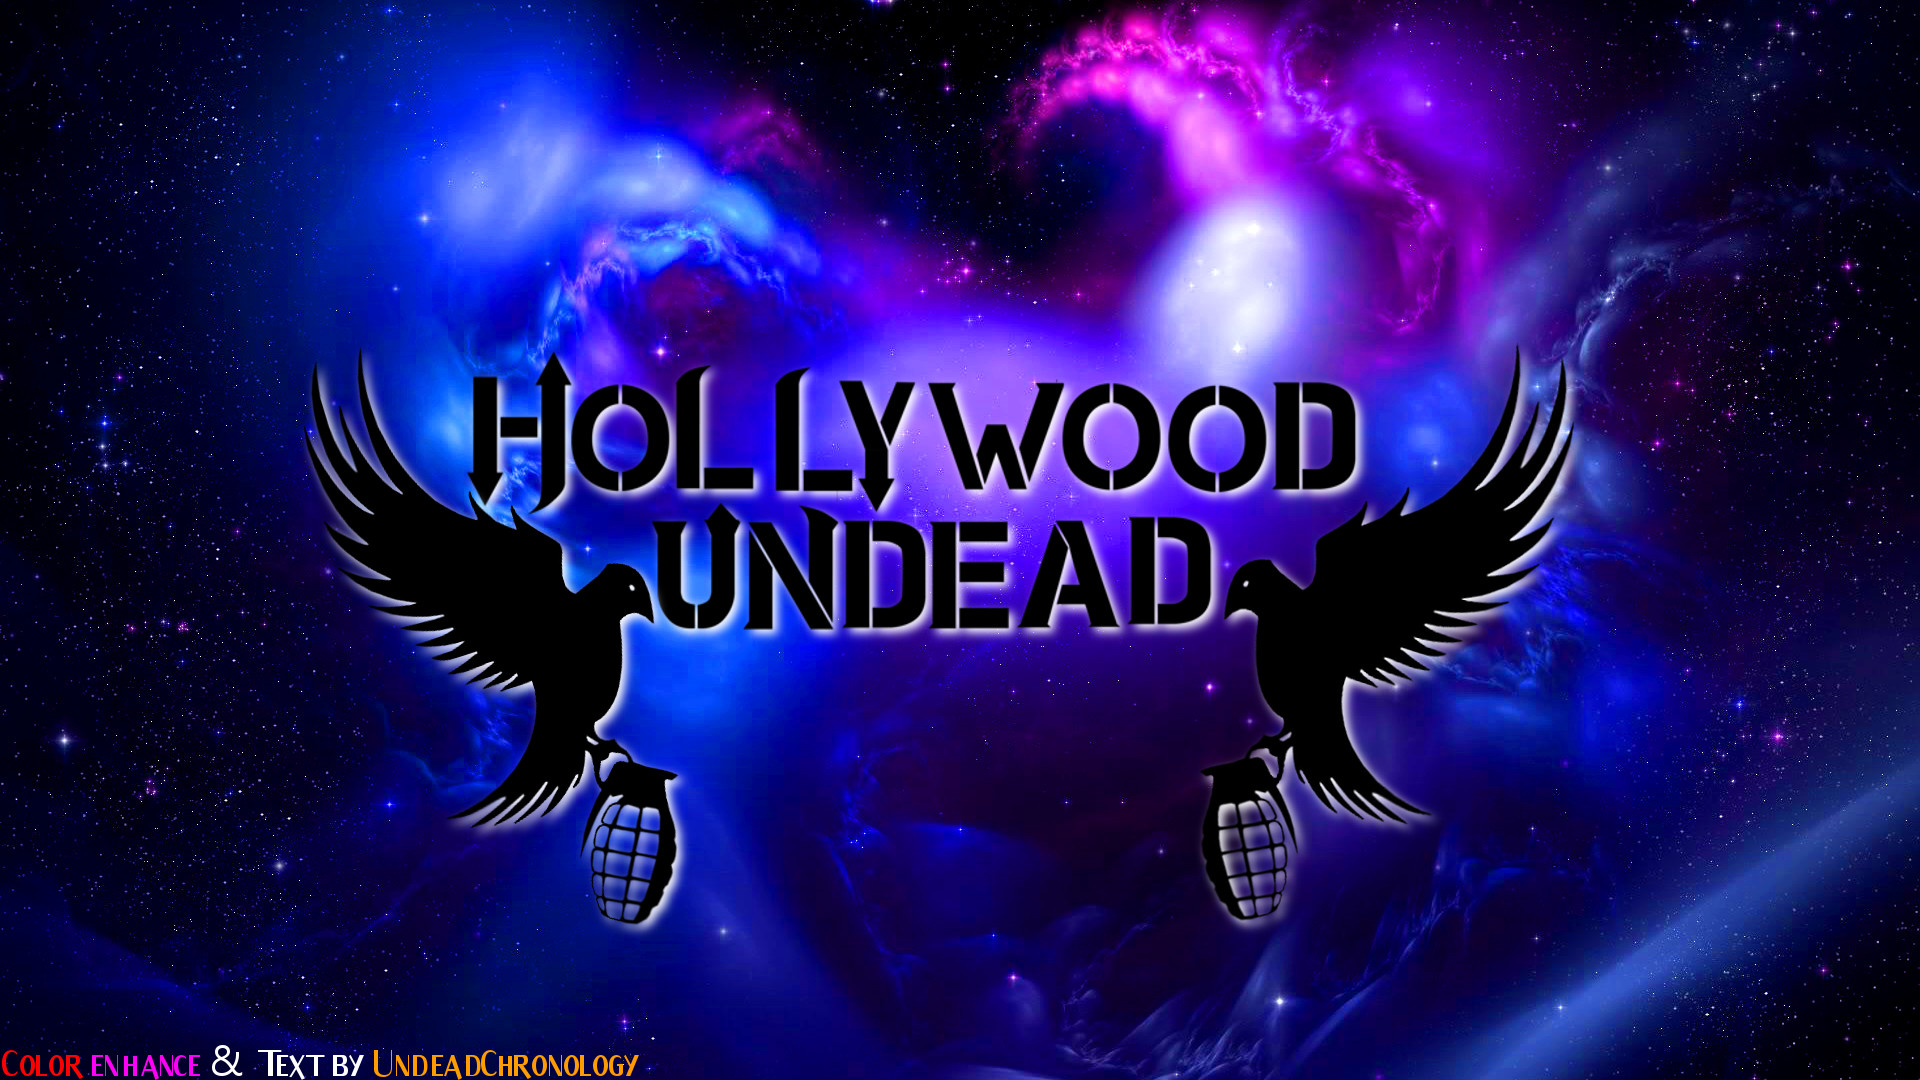 1920x1080 Hollywood Undead Wallpaper 1080p by DcfEmpx Hollywood Undead Wallpaper  1080p by DcfEmpx